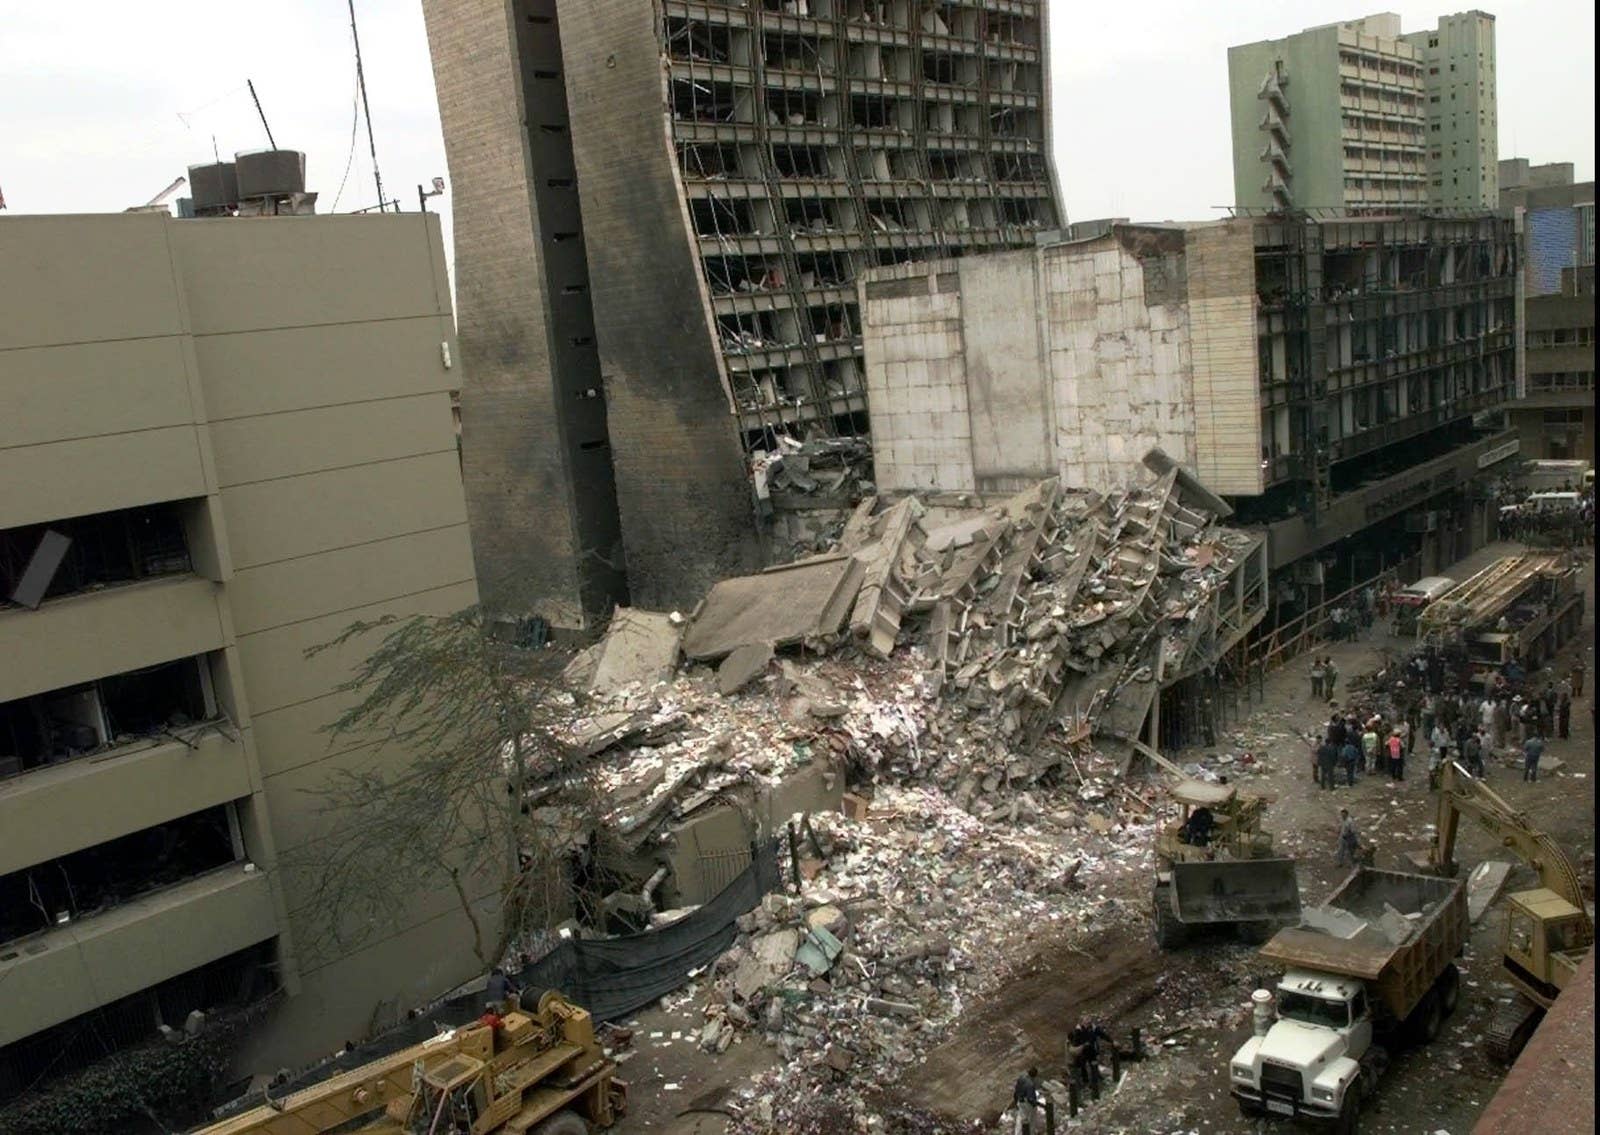 The United States Embassy, left, and other damaged buildings in downtown Nairobi, Kenya, the day after the 1998 al-Qaeda bombings in Kenya and Tanzania.